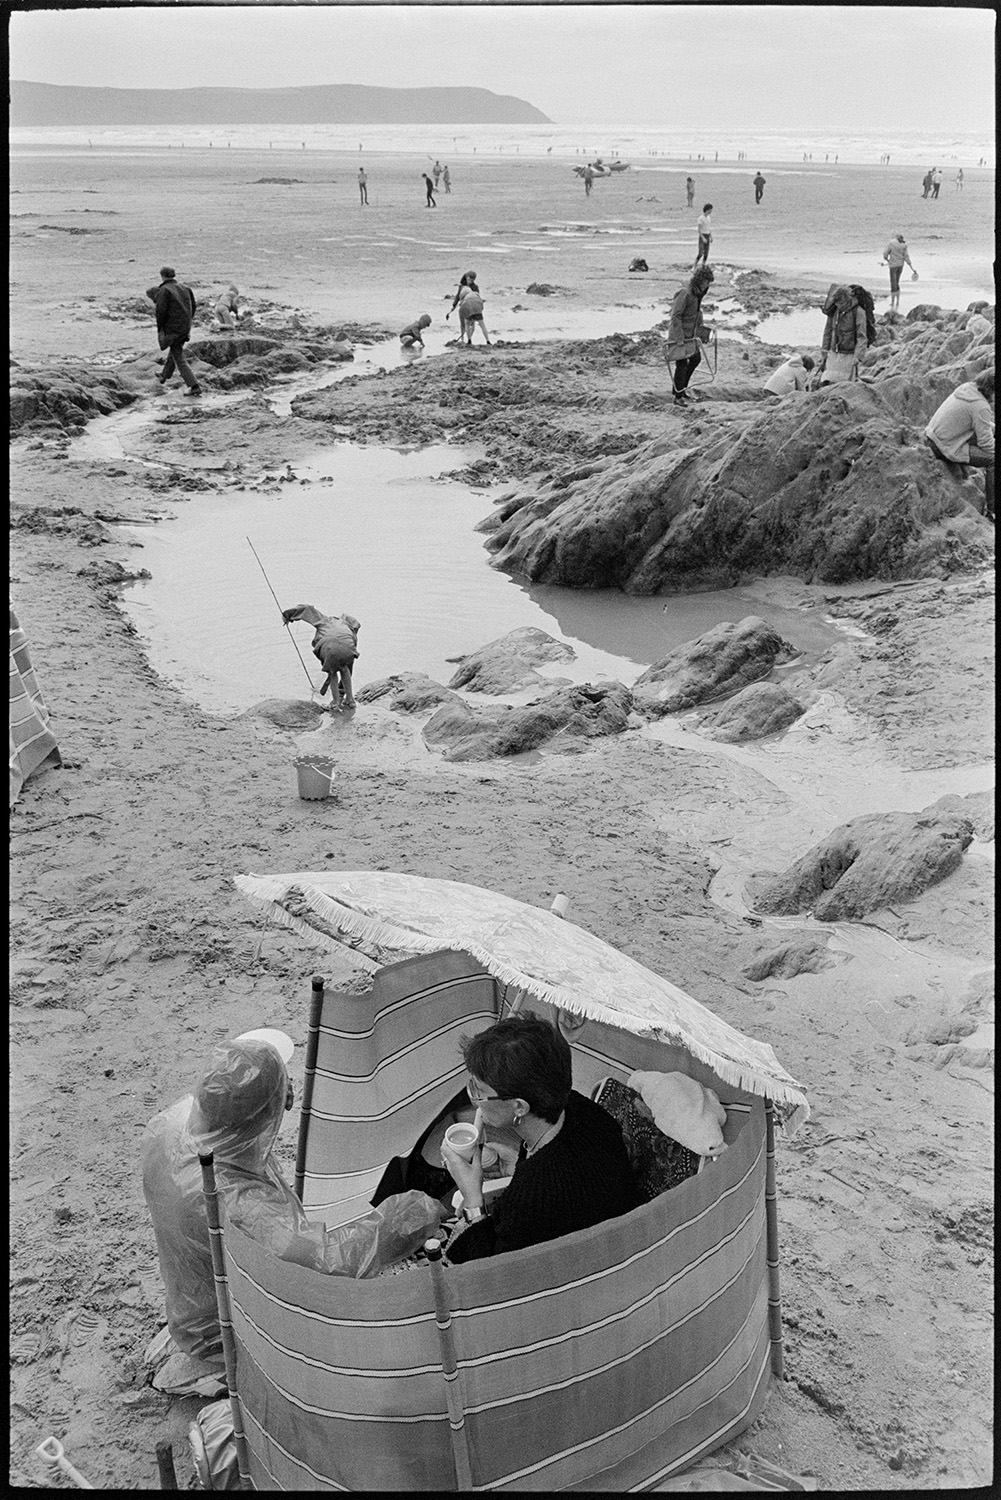 Beach scenes with people sheltering and having tea, children playing in rock pools.
[Holidaymakers on Woolacombe beach sheltering behind a windbreak and drinking tea. Children are playing in rock pools nearby and the sea and cliffs are visible in the background.]